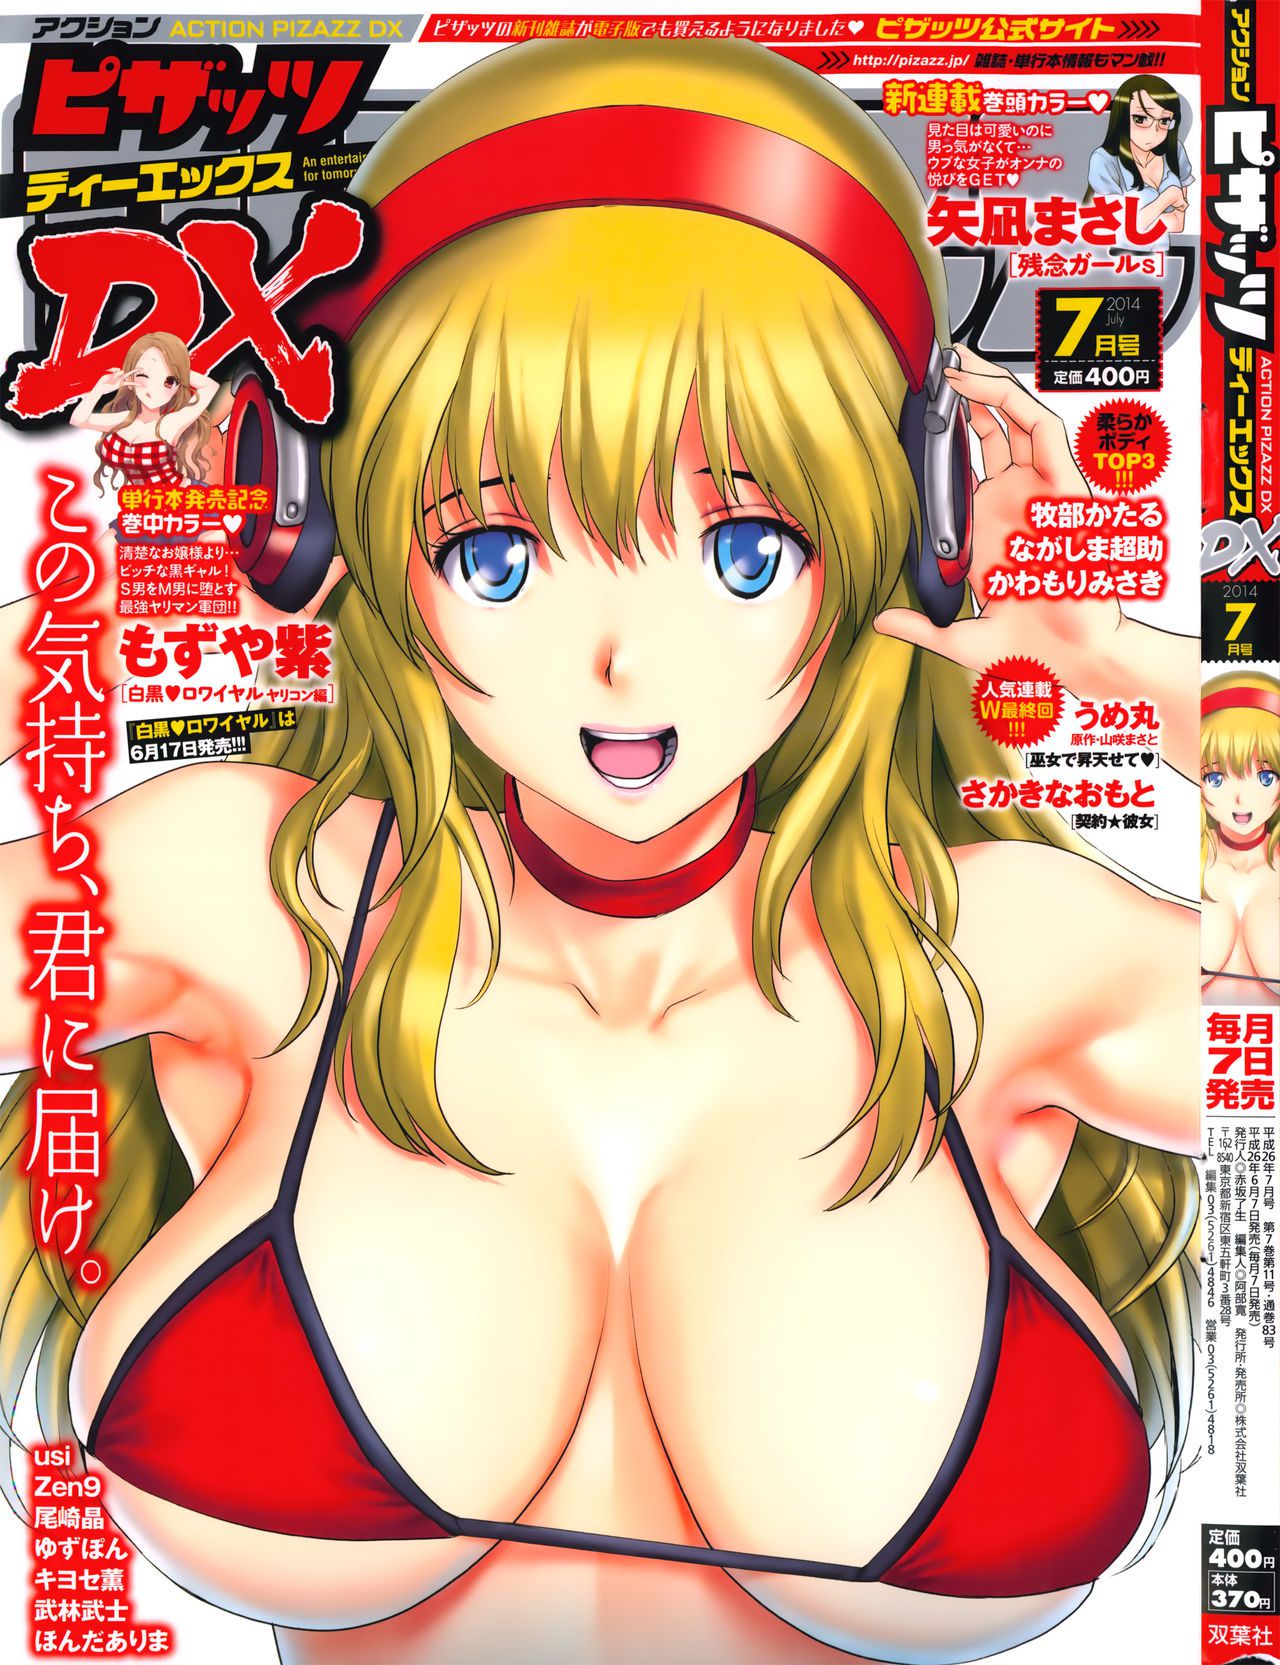 [Saigado] Cover Illustrations [彩画堂] Cover Illustrations 204